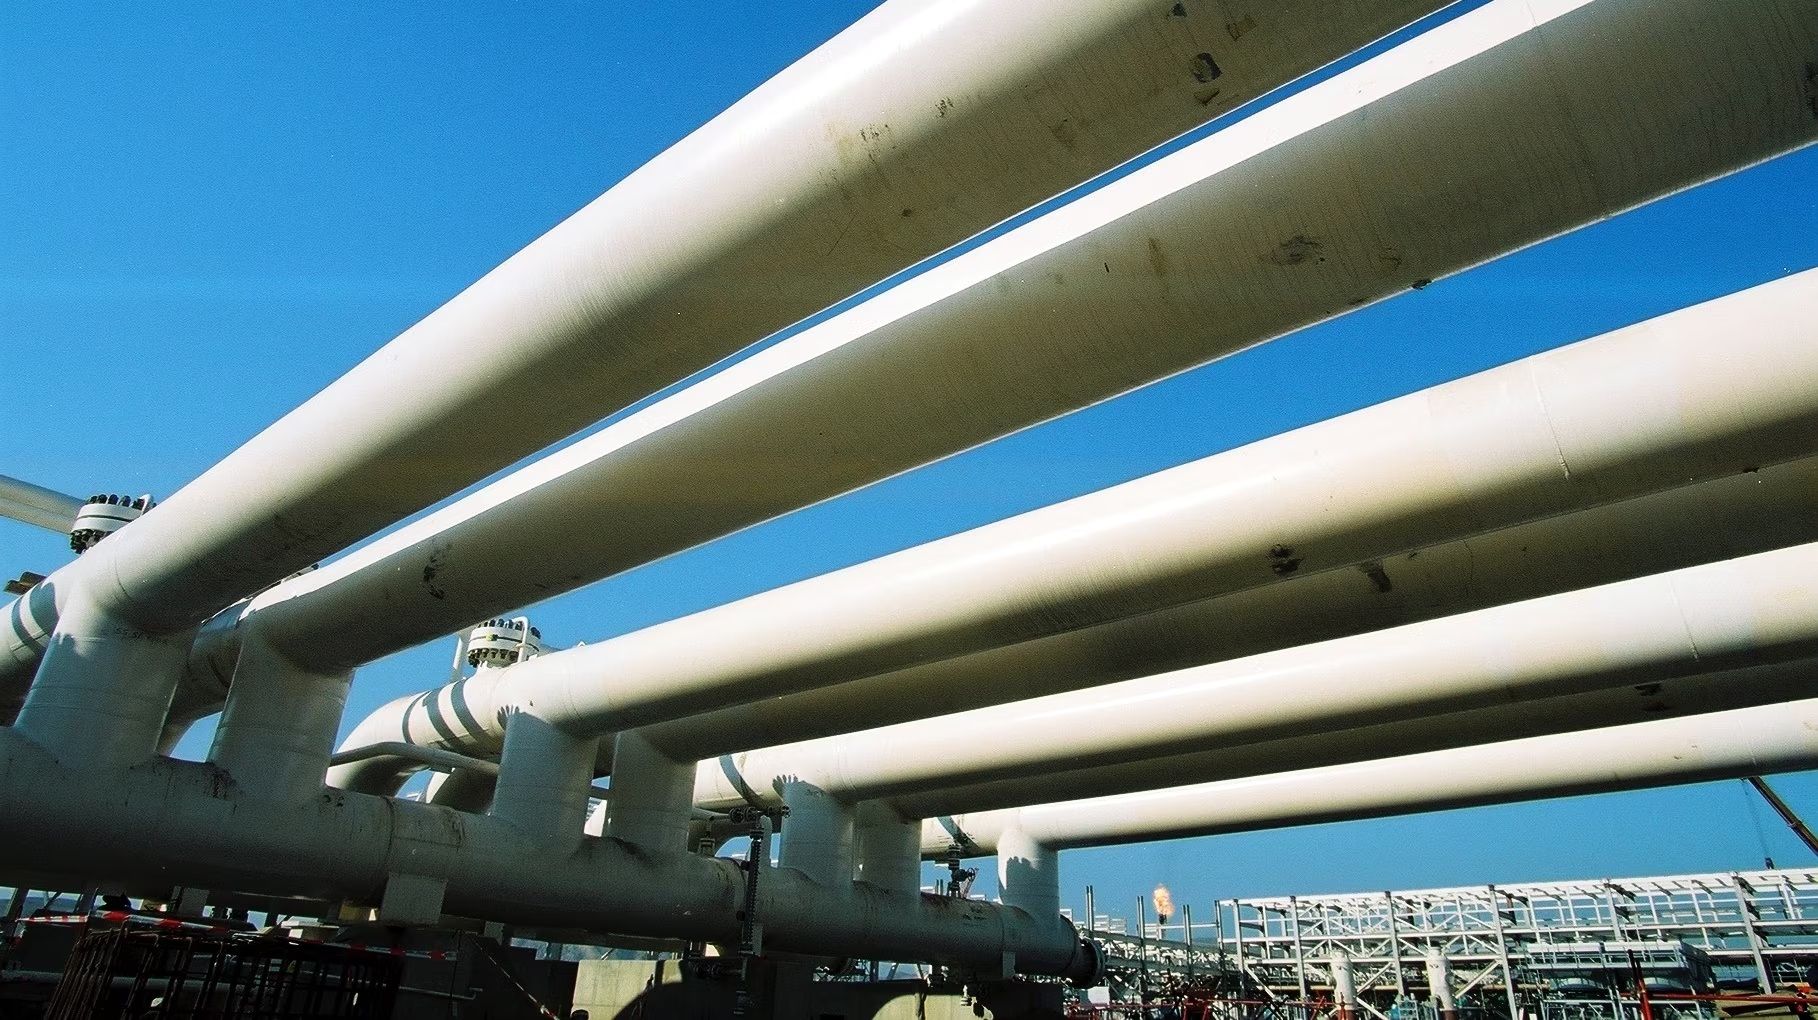 South Caucasus Pipeline Company discovers total operating expenditures in Q1